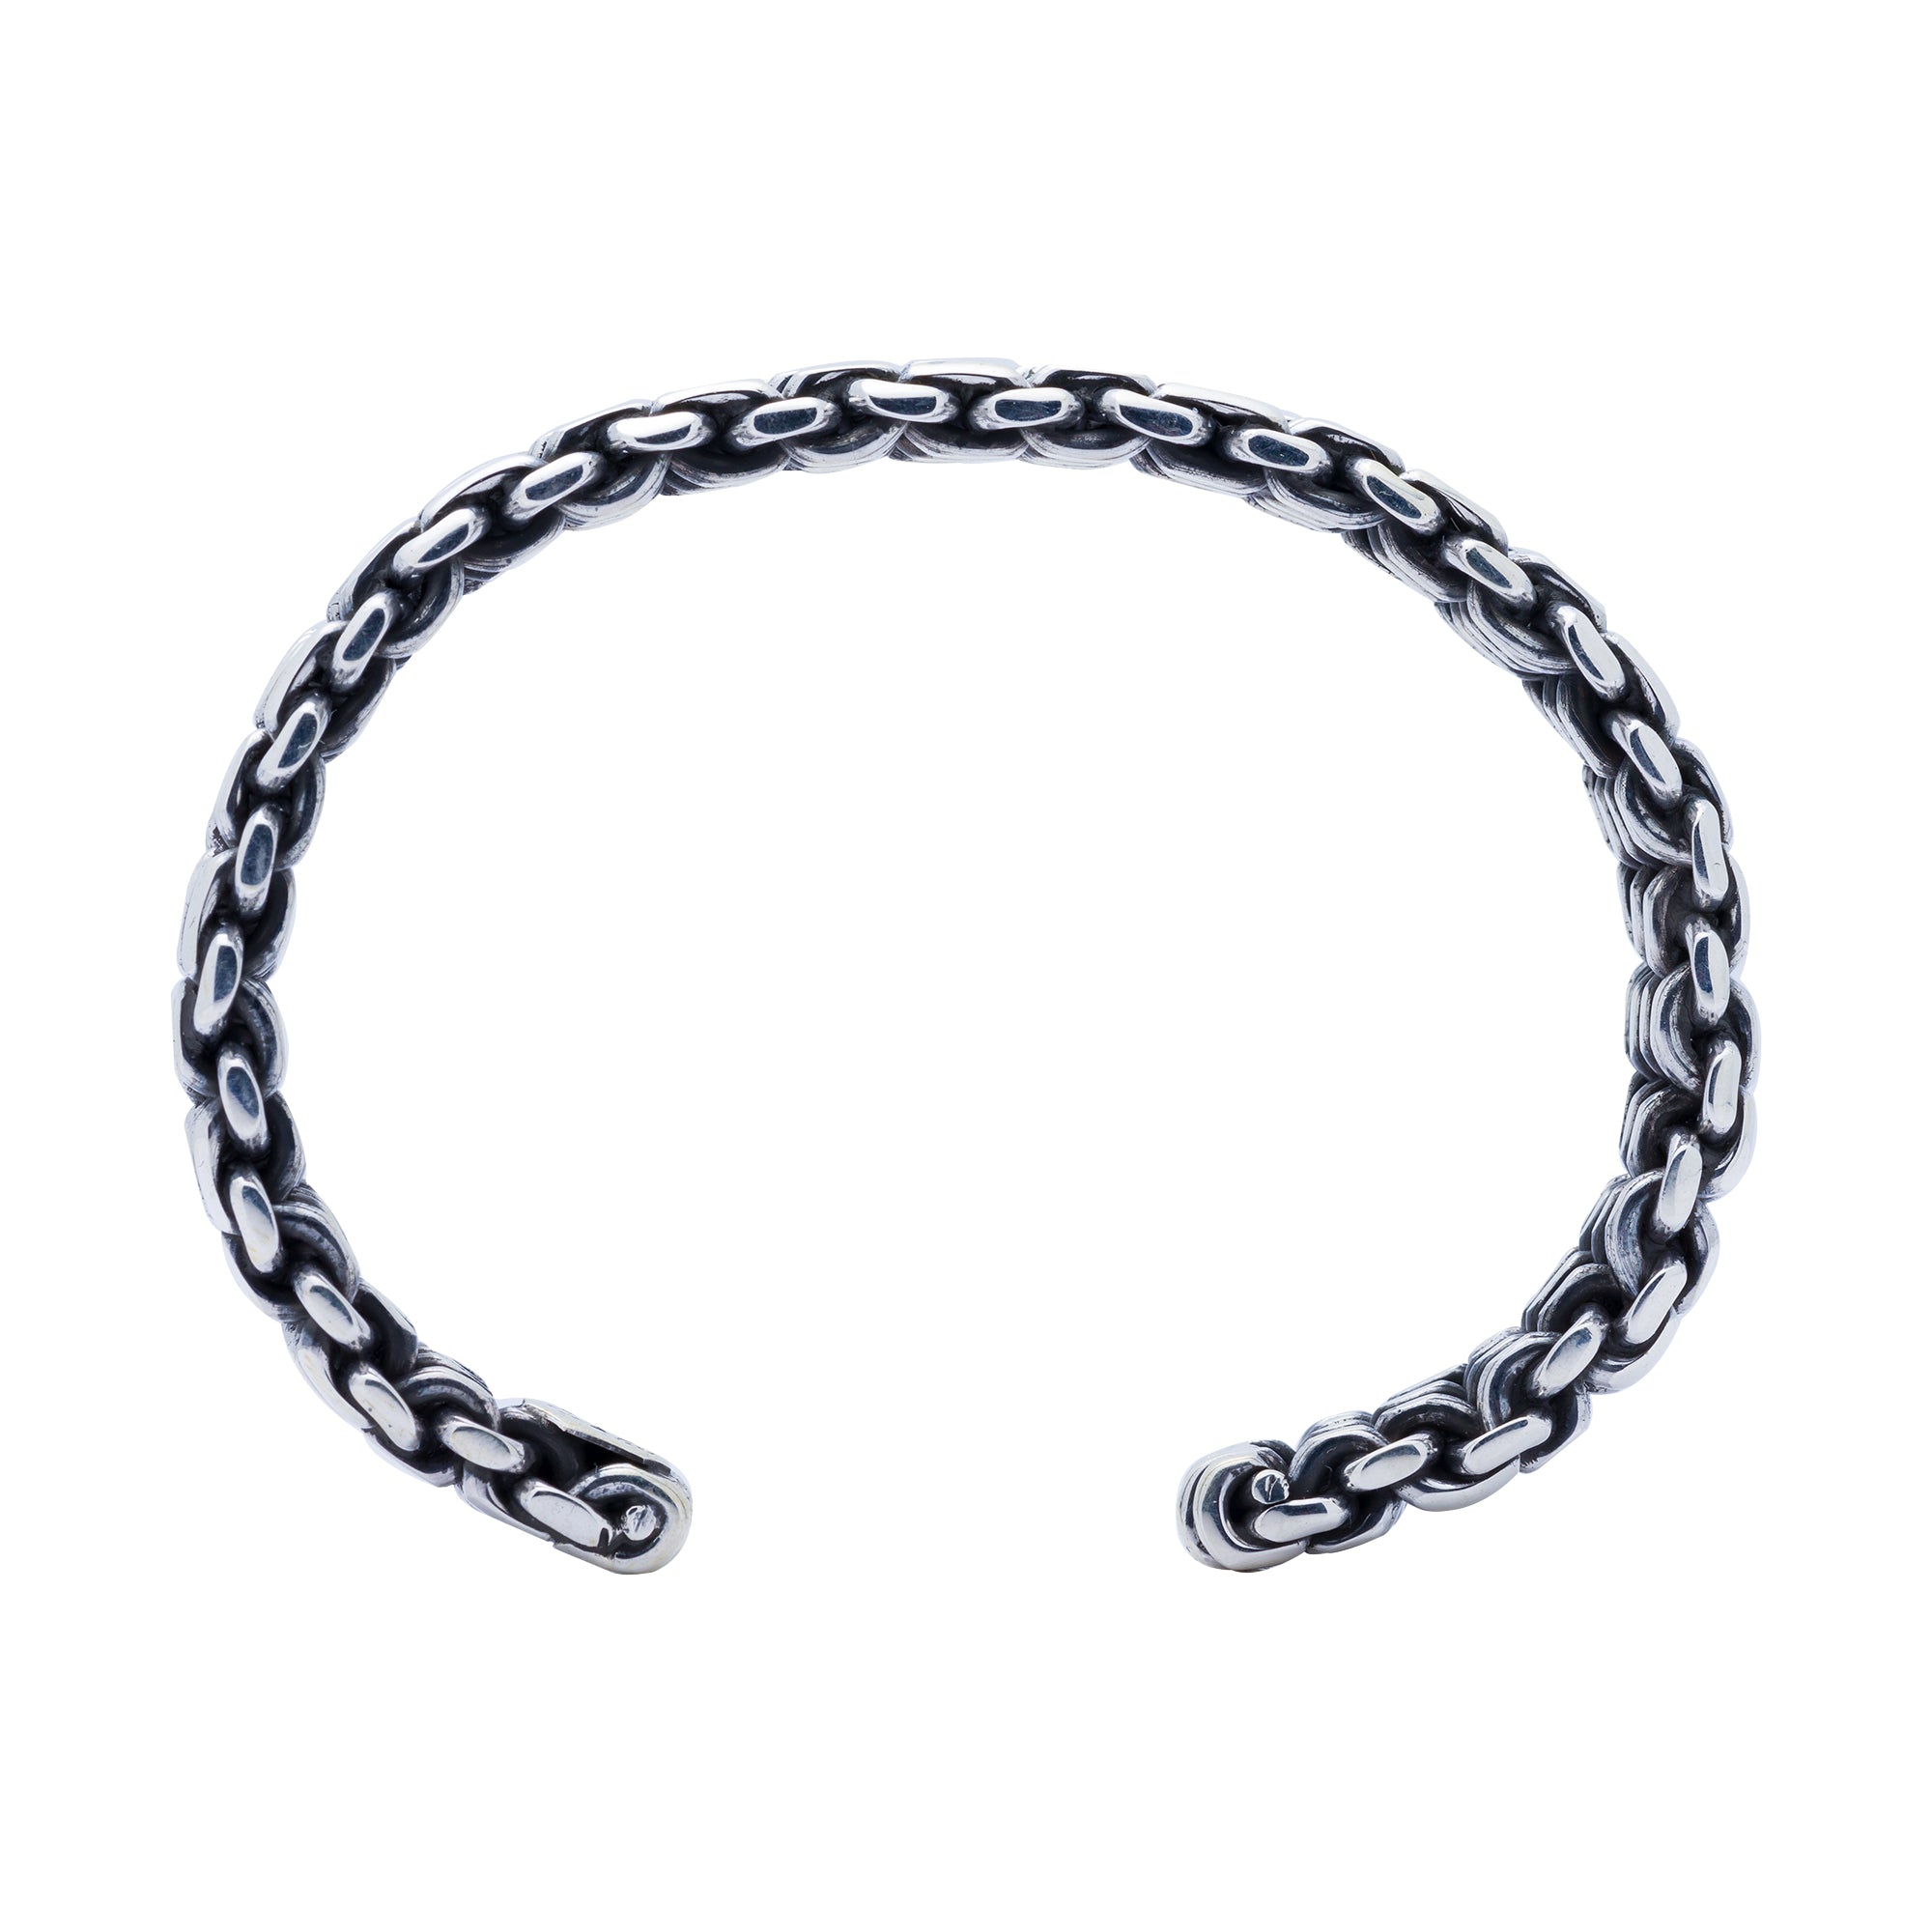 BR.VIC.1025 - Sterling Silver Braided Bracelet, Rogue 20m